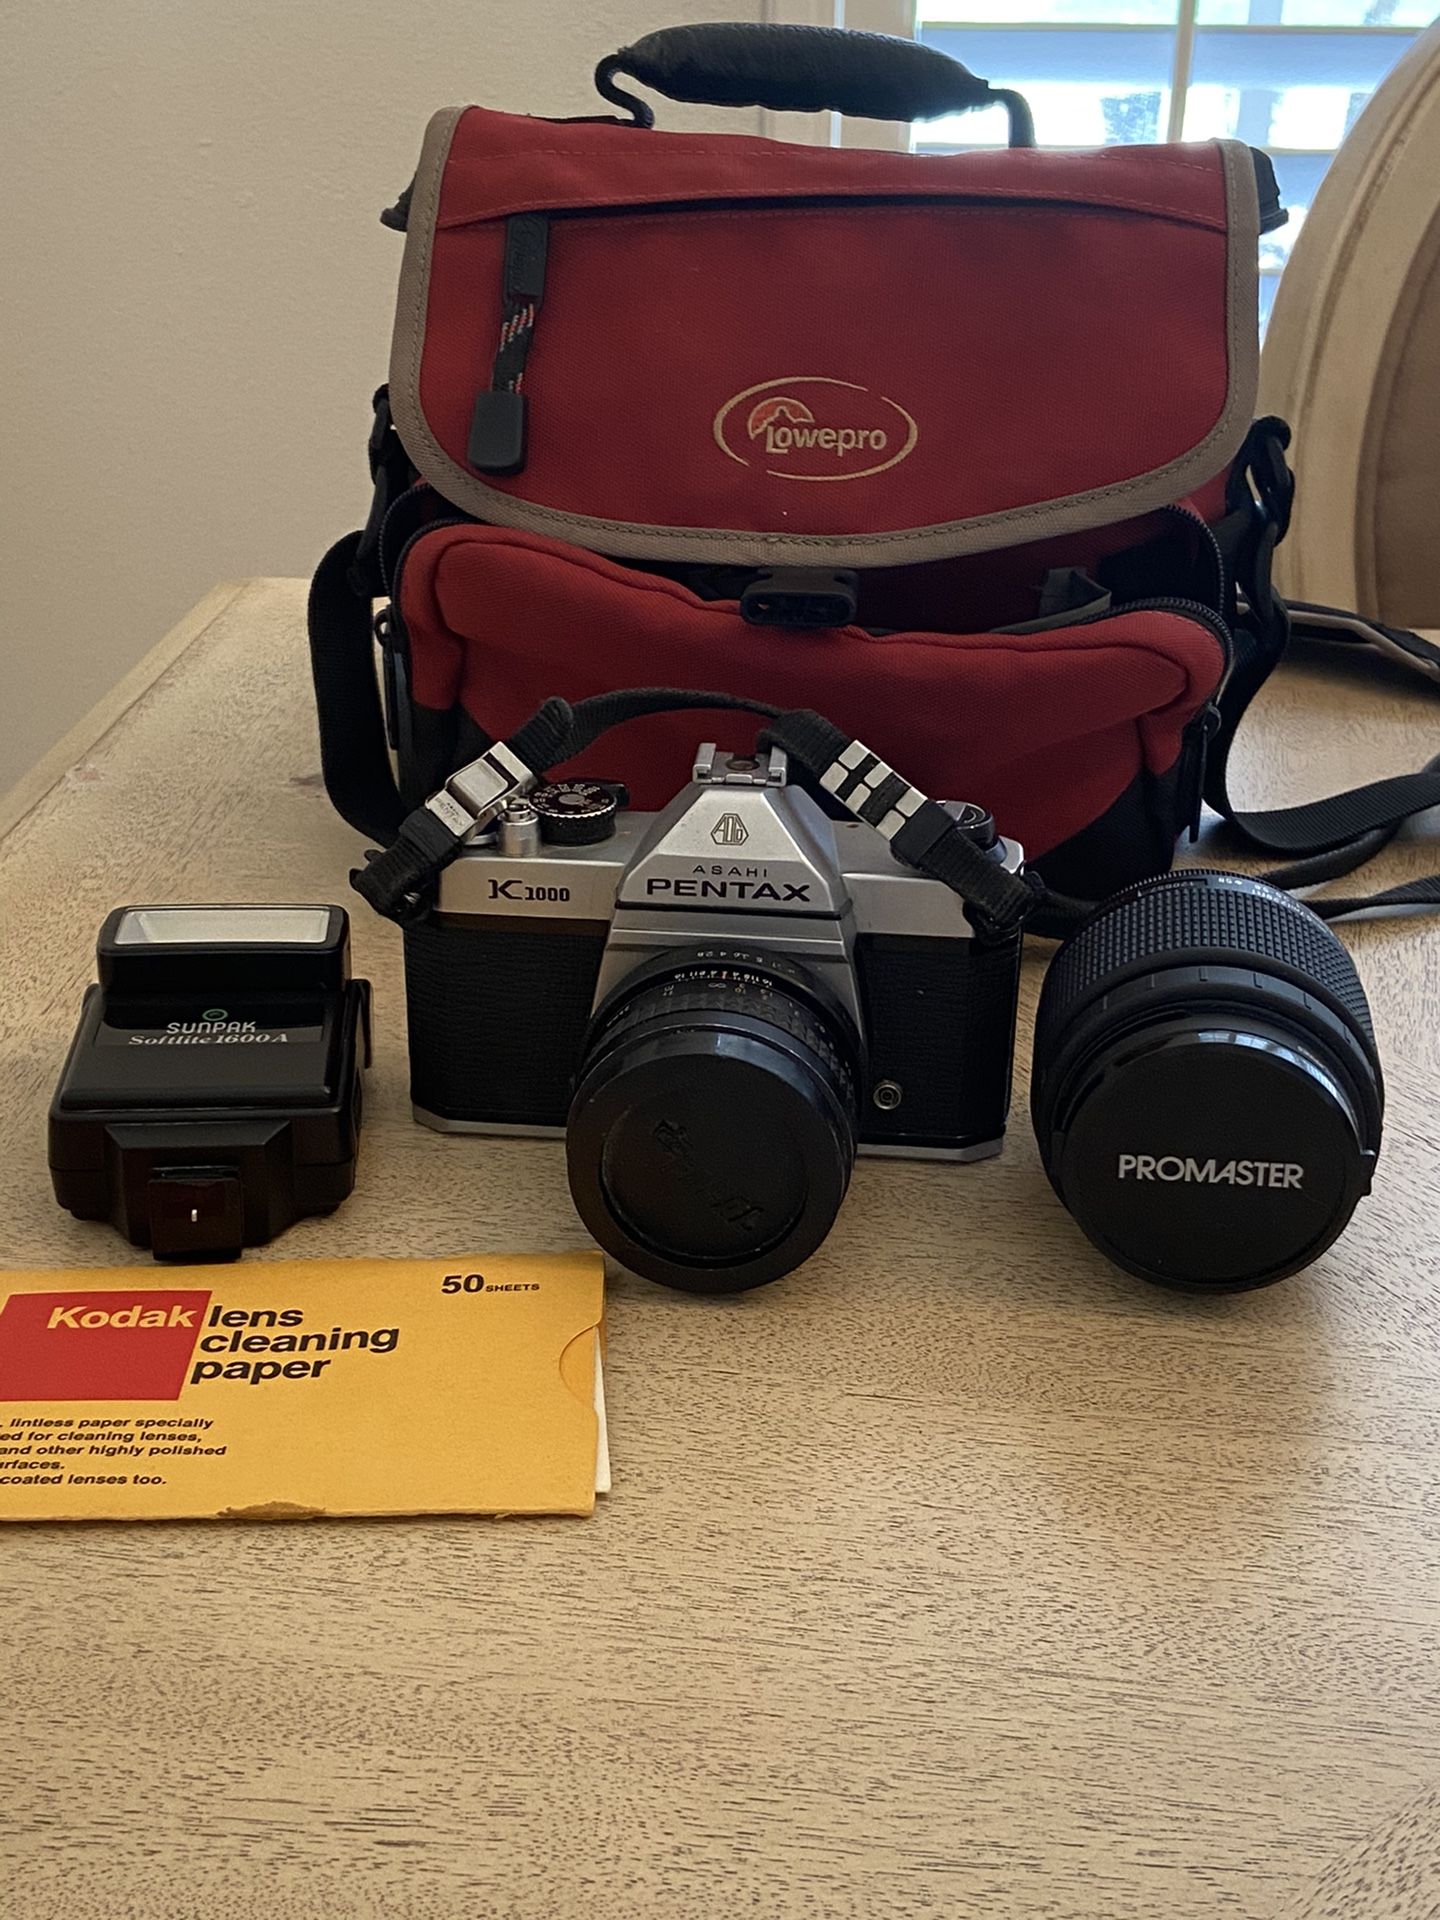 Pentax Asahi - K 1000 Camera w/ Lens, includes: Extra lens - Promaster, Flash SunPass, Case -Lowepro, & cleaning paper. In excellent condition $99